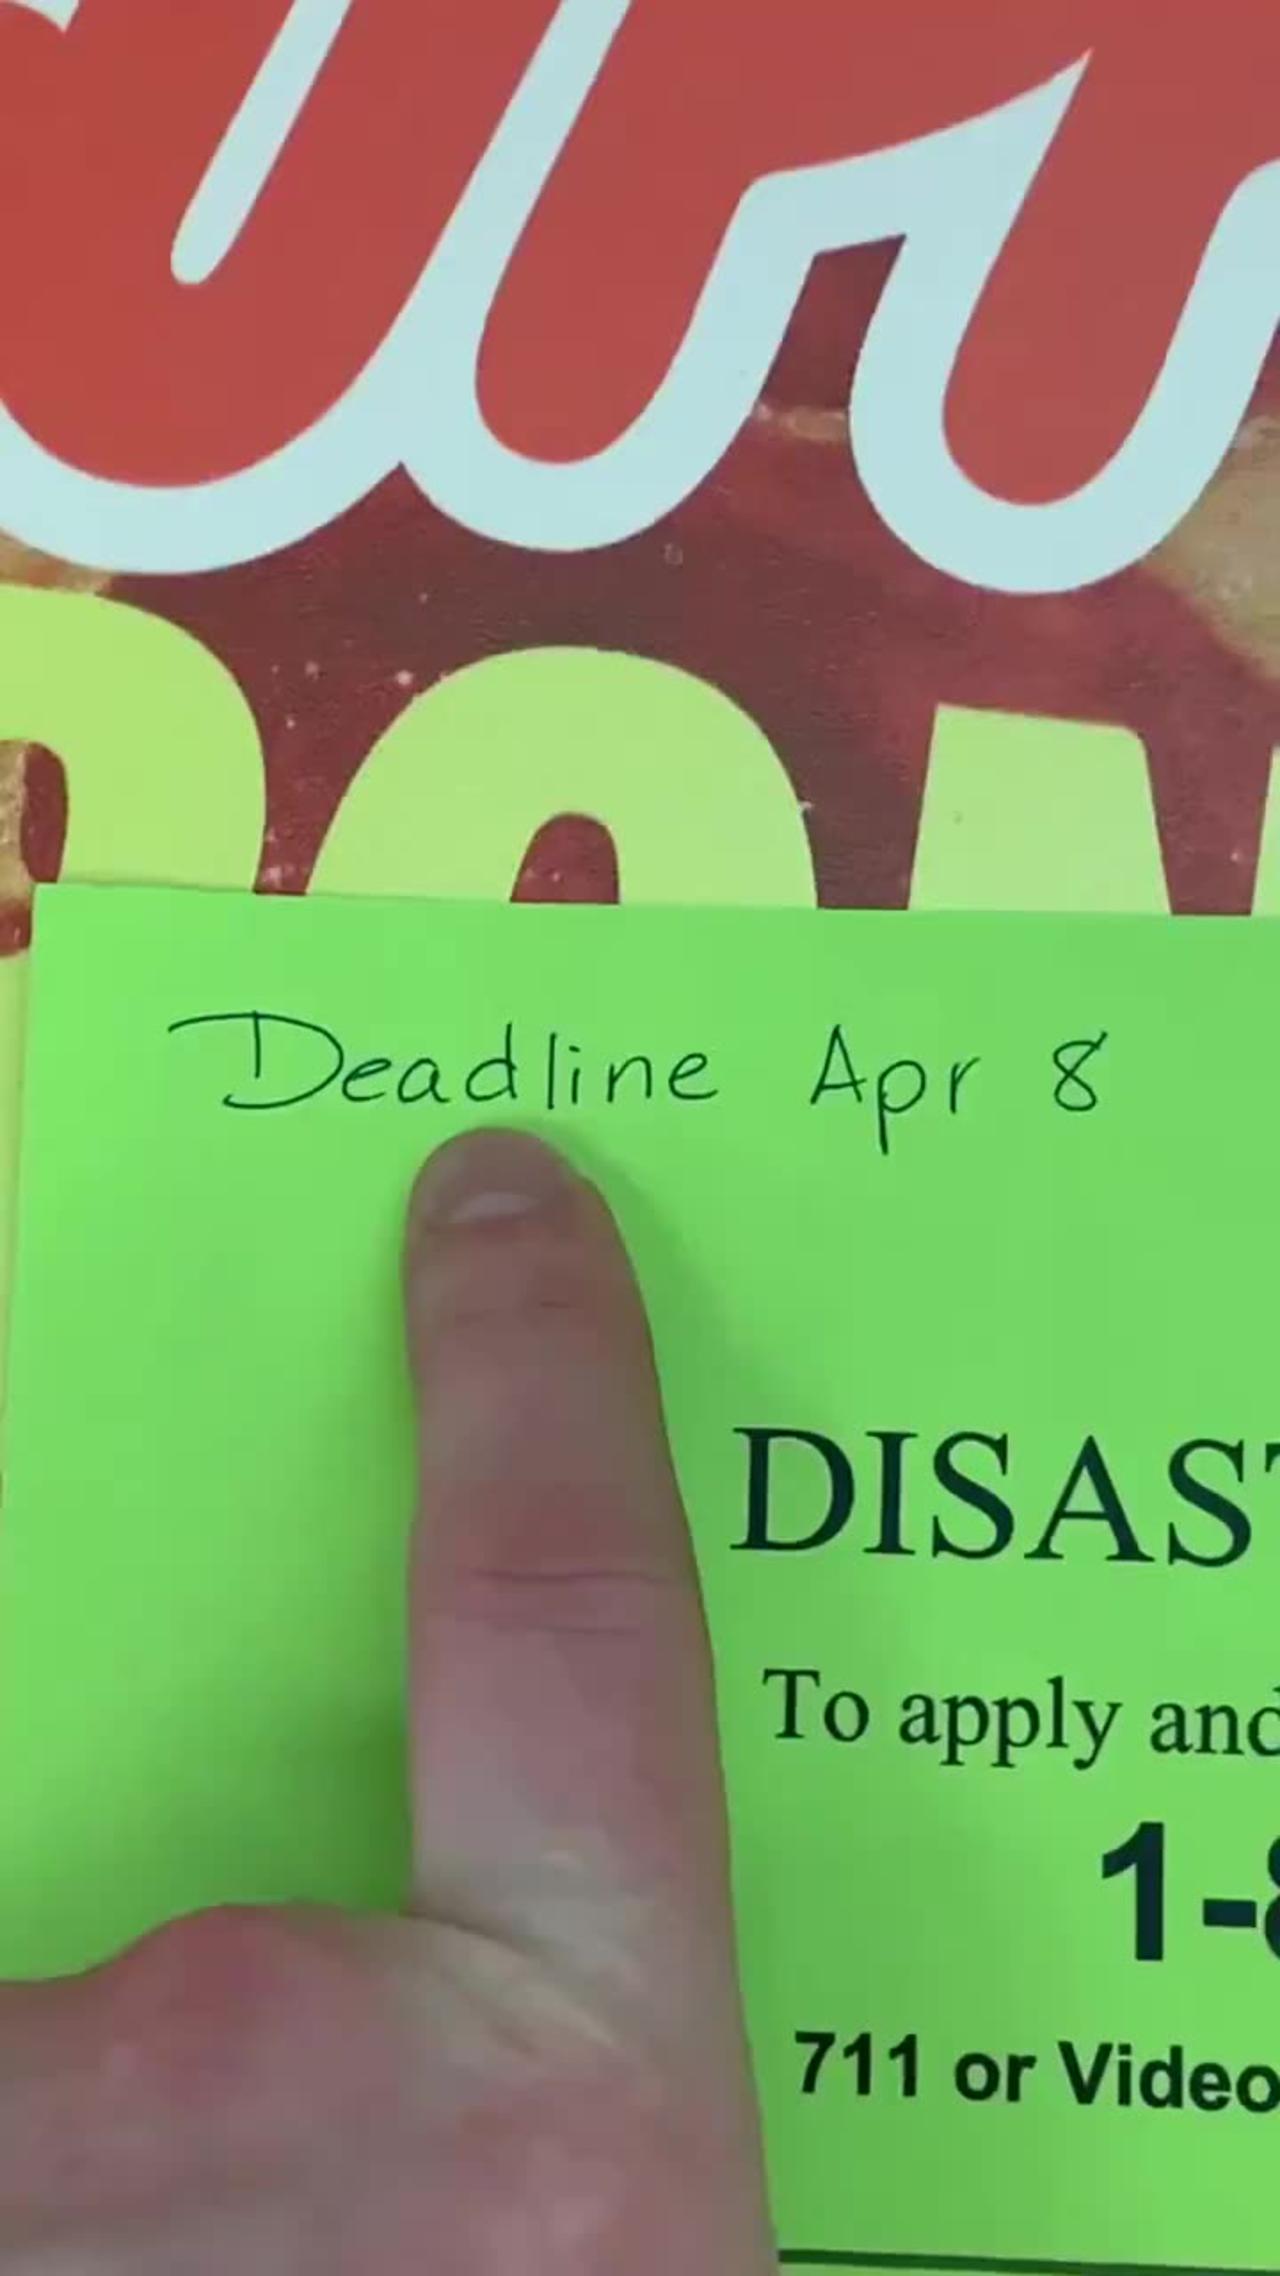 Supposedly in time for April 8, FEMA is distributing flyers about the disaster